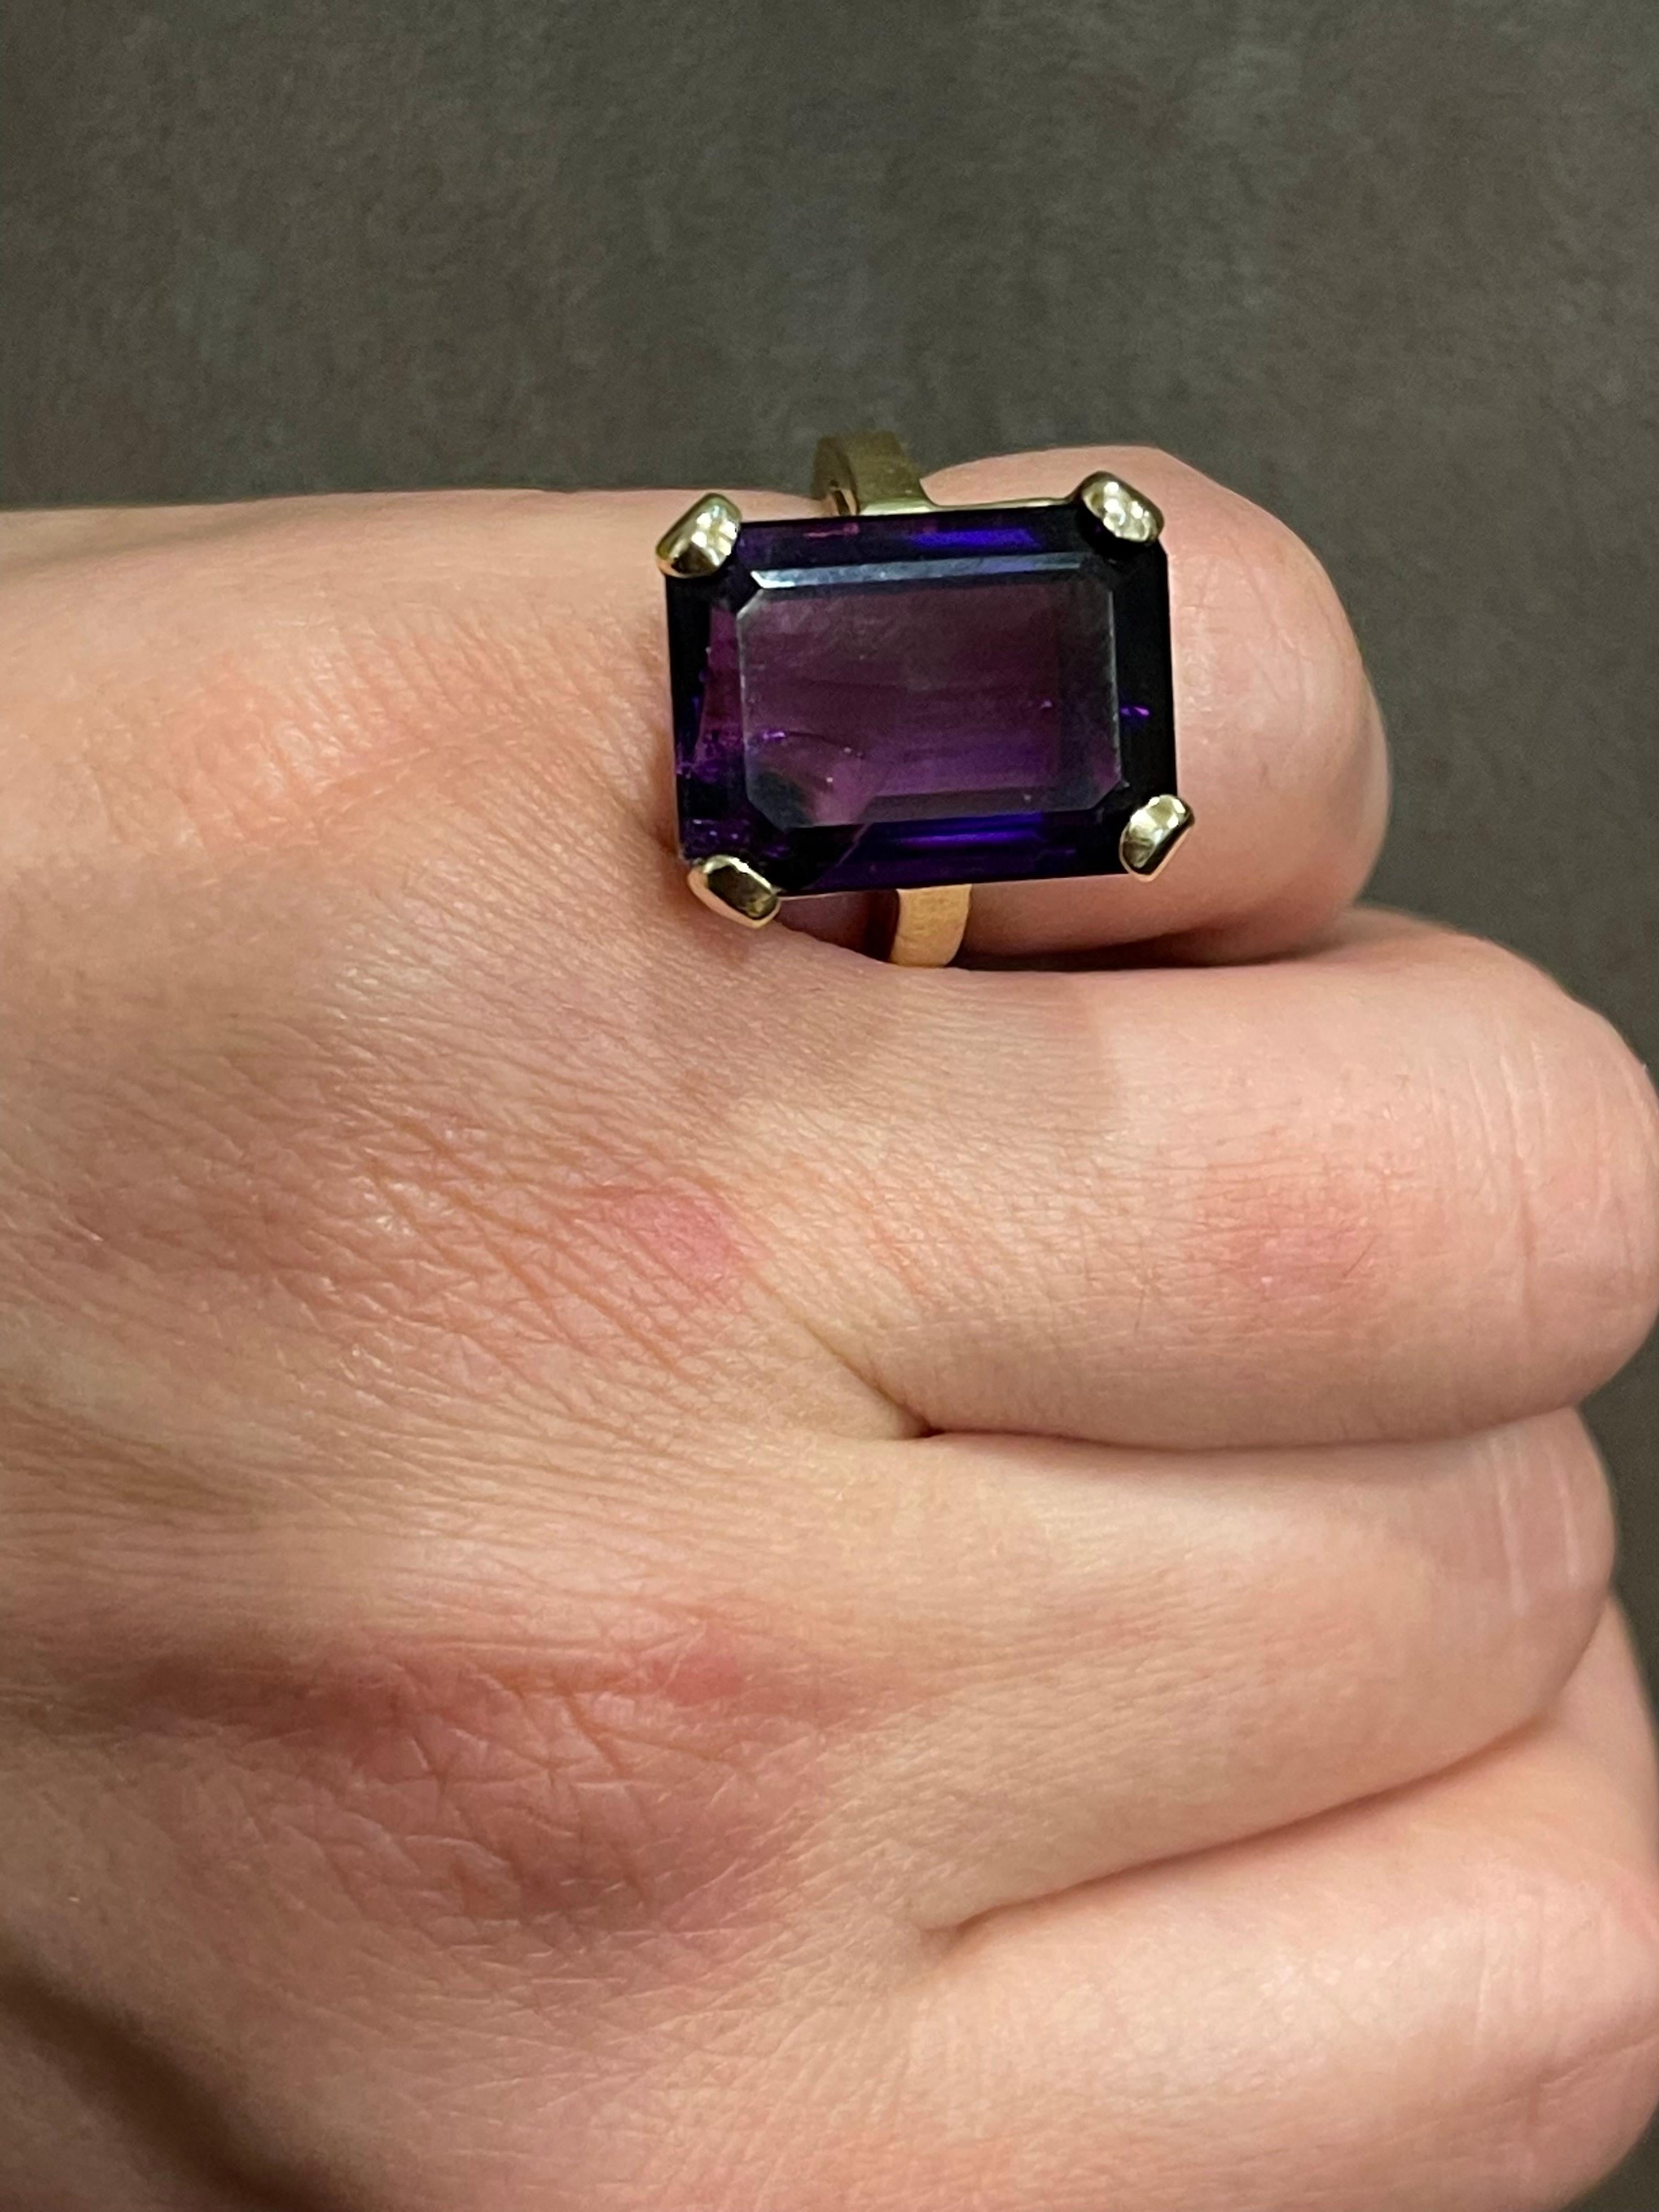 15 Carat Emerald Cut Amethyst Cocktail Ring in 14 Karat Yellow Gold For Sale 11